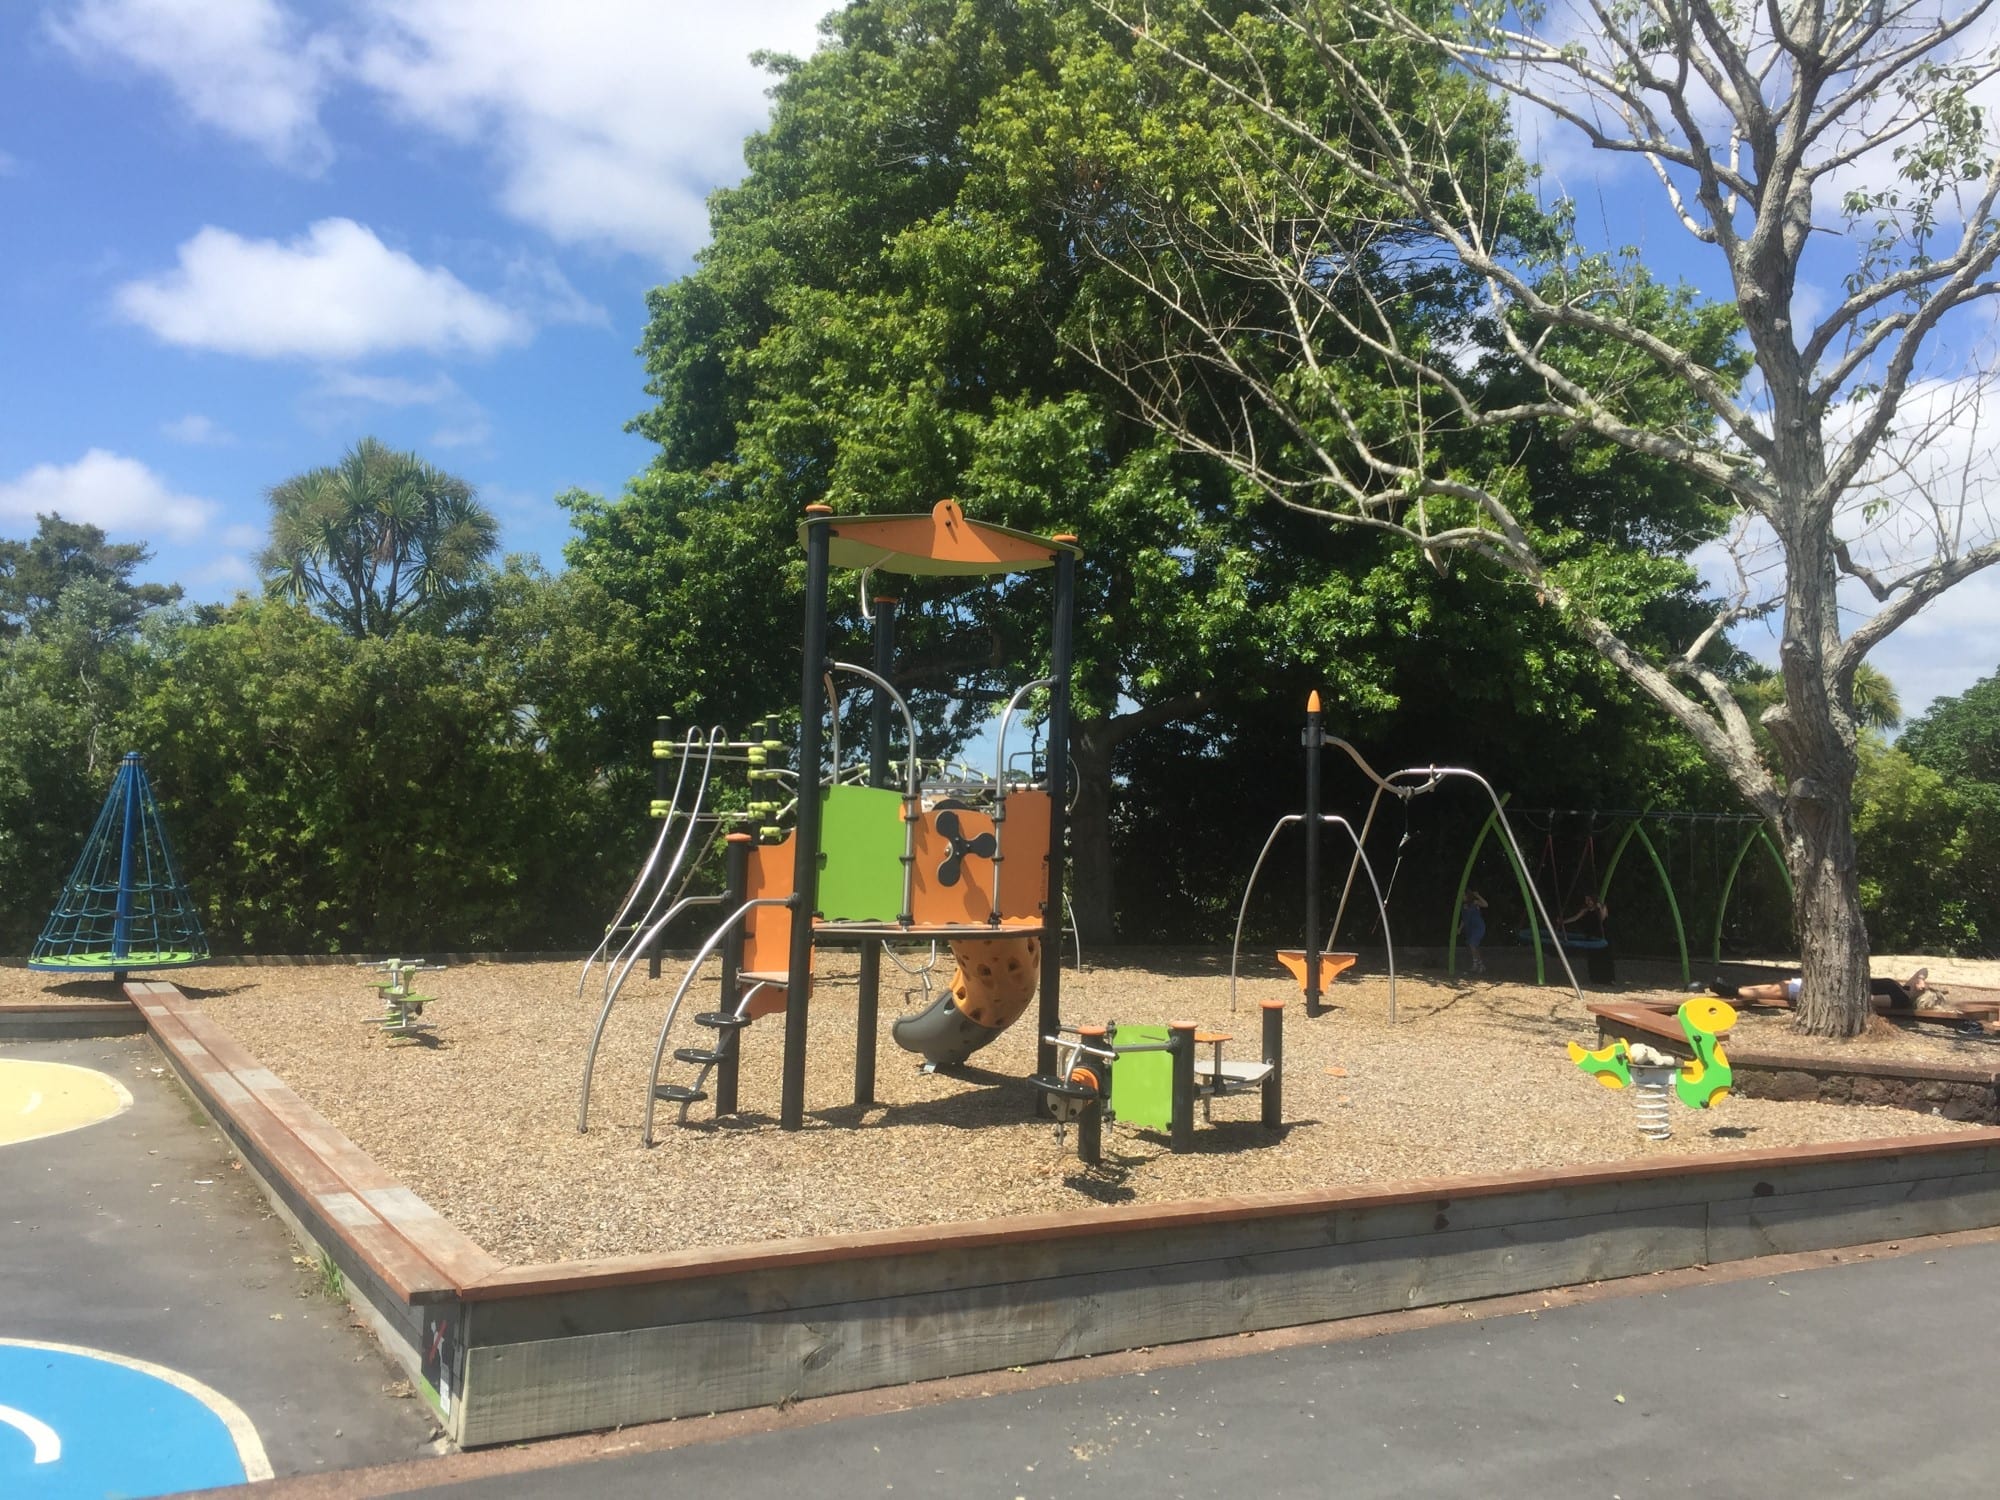 Tole Reserve Playground and Bike Park